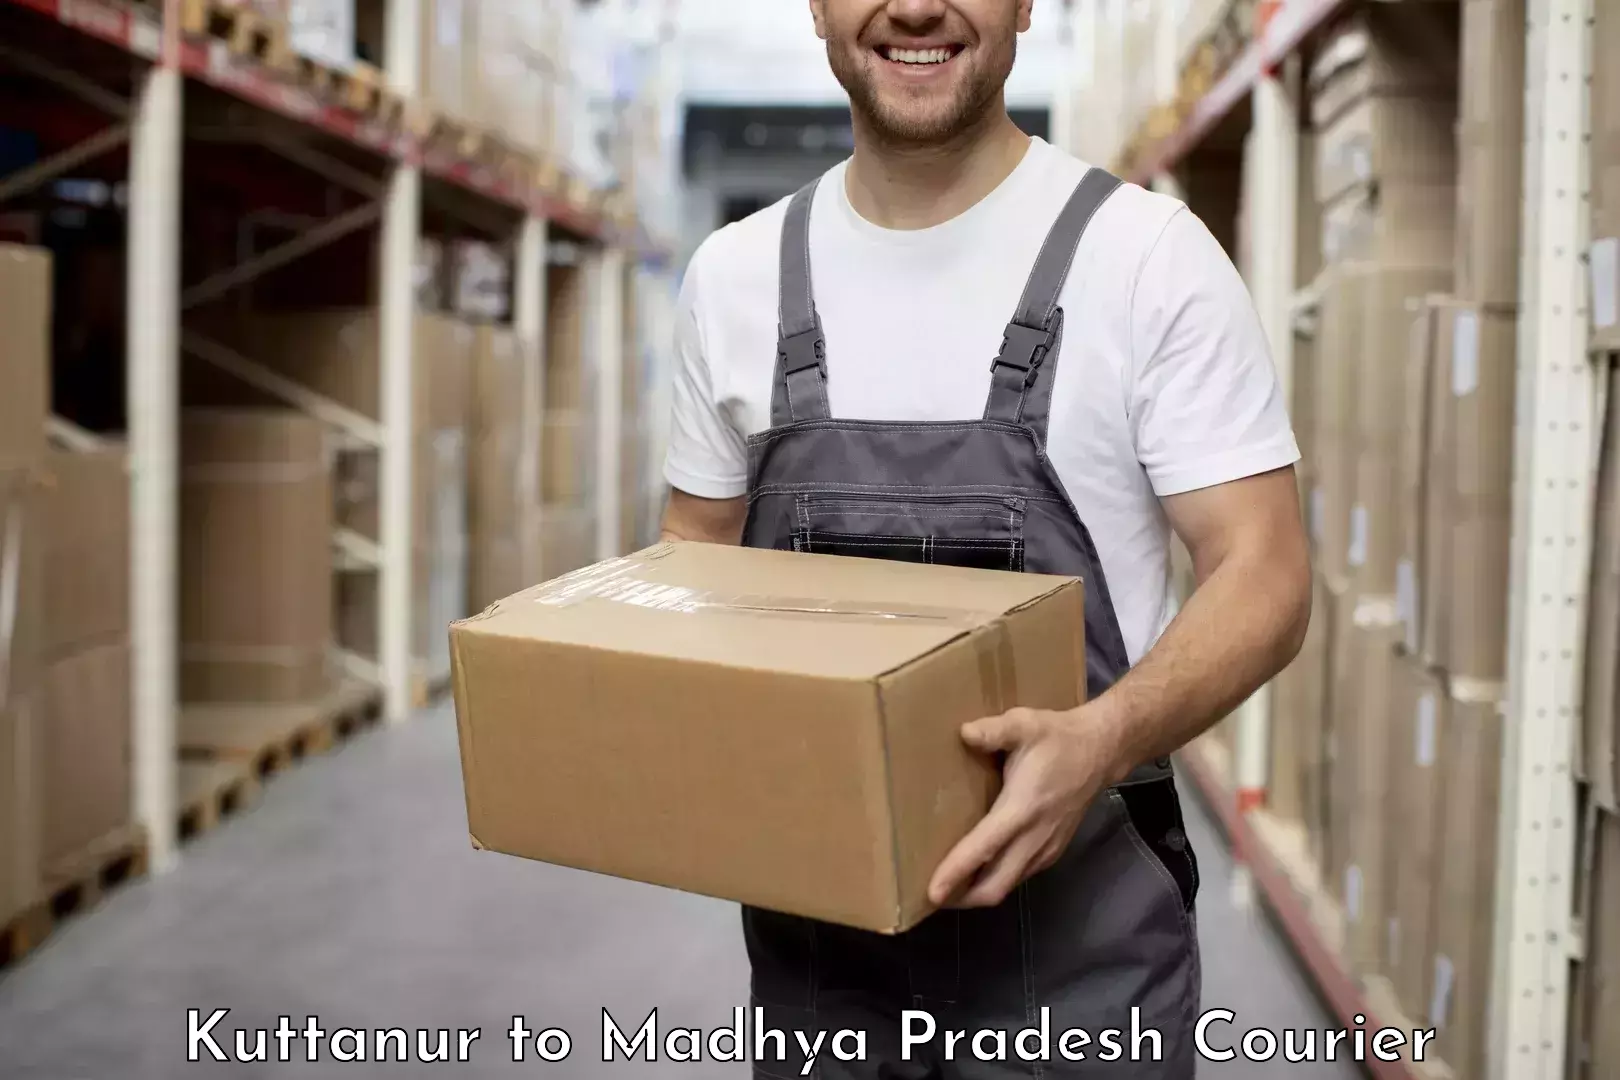 Nationwide shipping coverage Kuttanur to Ranchha